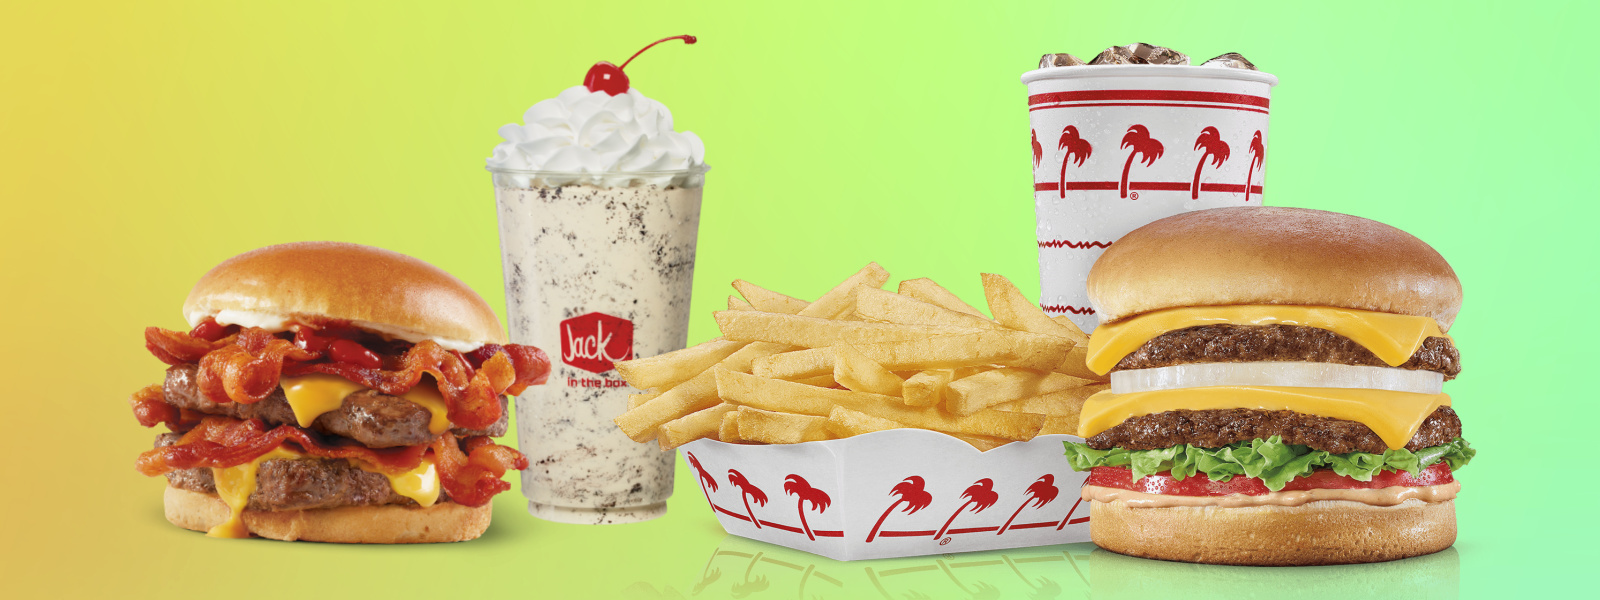 The Best Tasting Order Under $3 At 14 Fast Food Chains